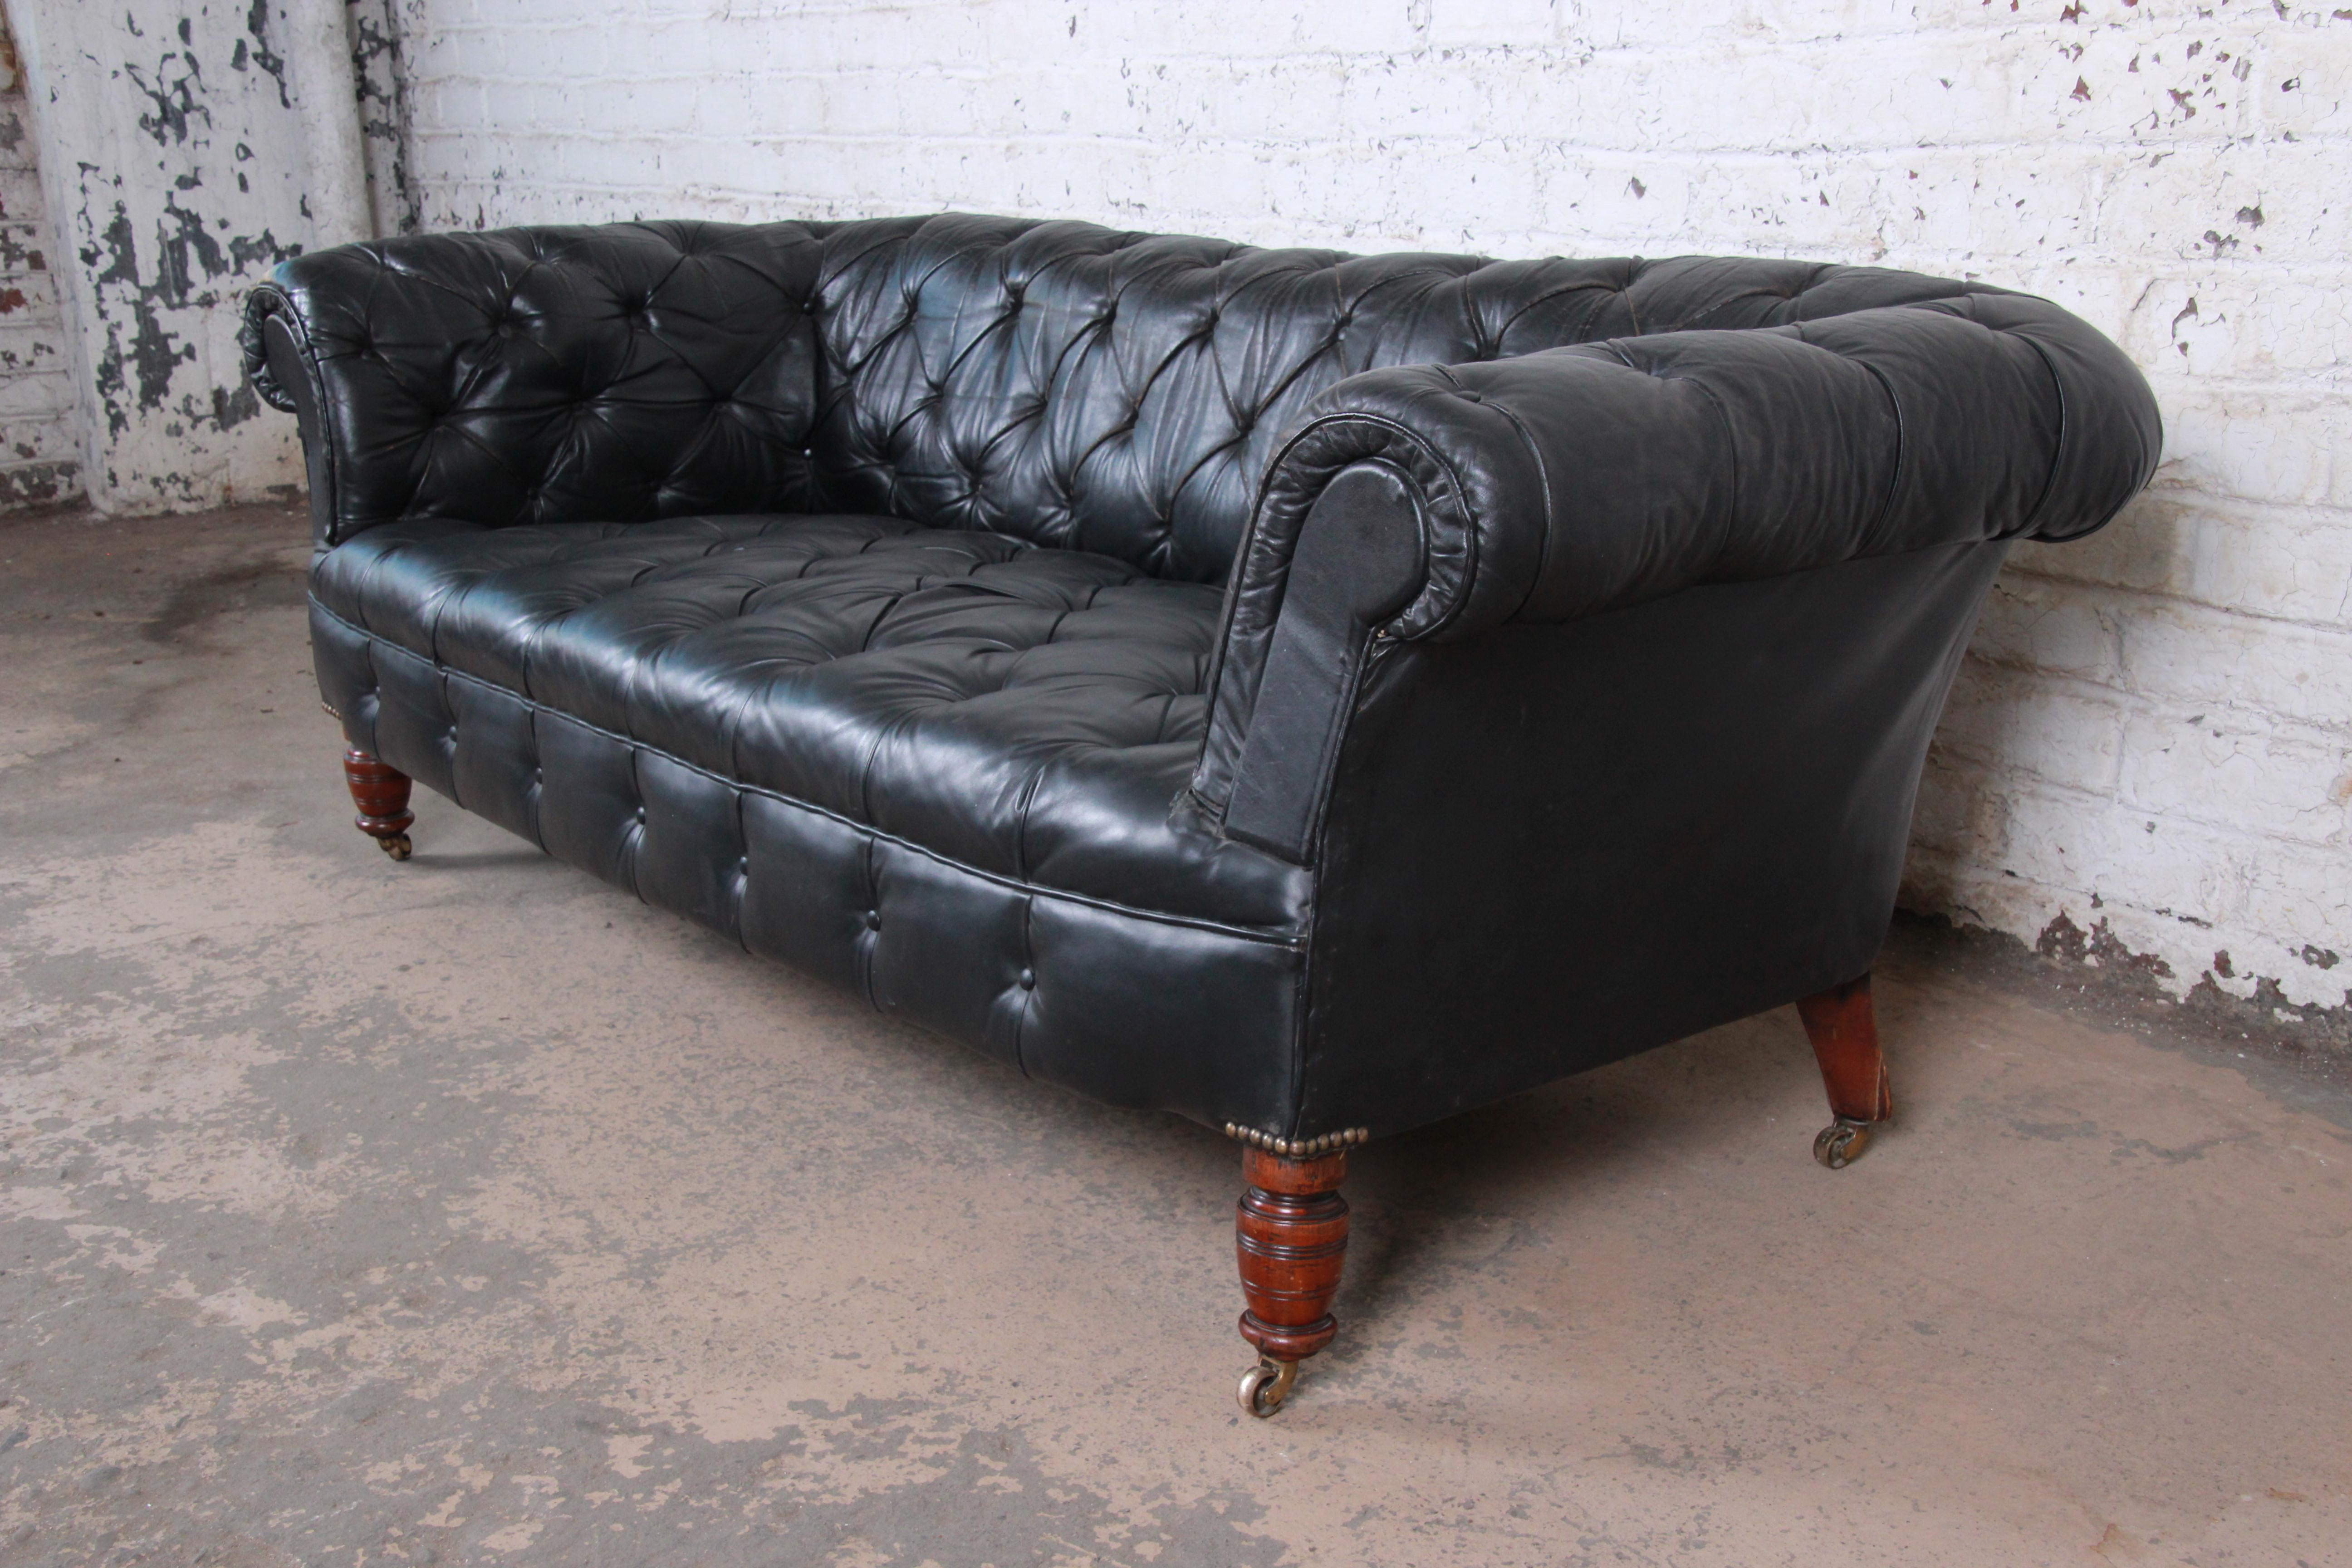 Vintage Tufted Black Leather Chesterfield Sofa, circa 1960s 1